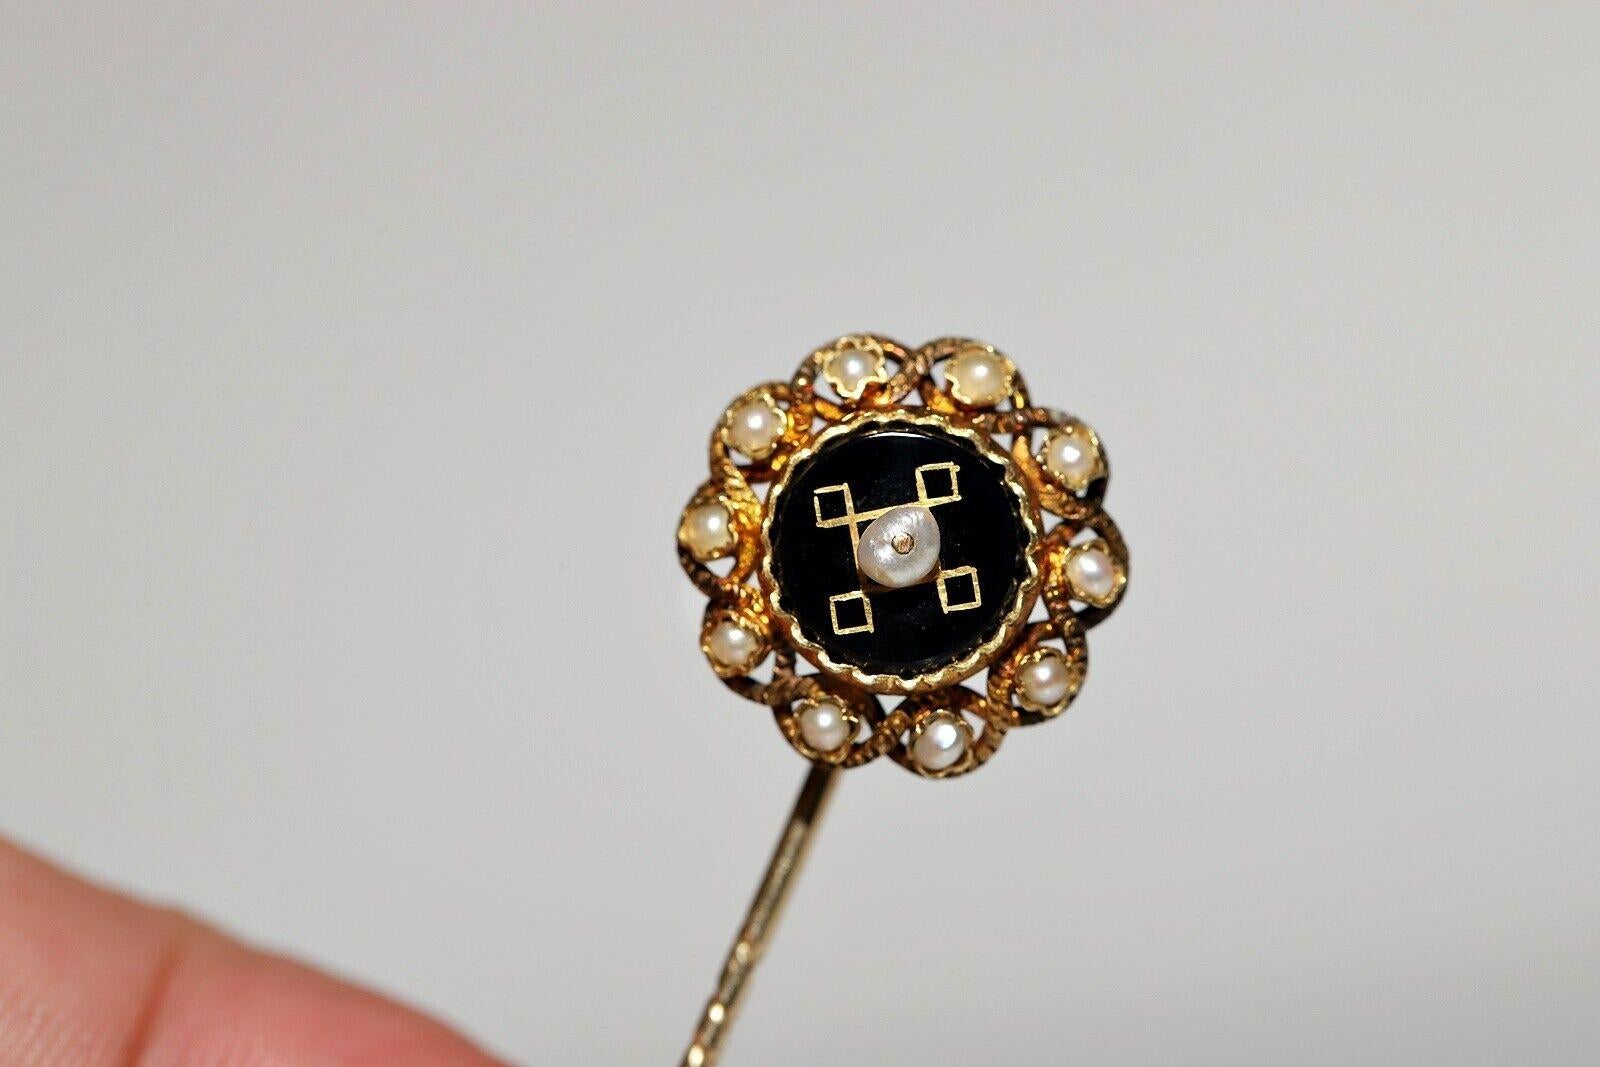  Antique Original Circa 1900s 14k Gold Natural Pearl And Onyx Decorated Brooch For Sale 2